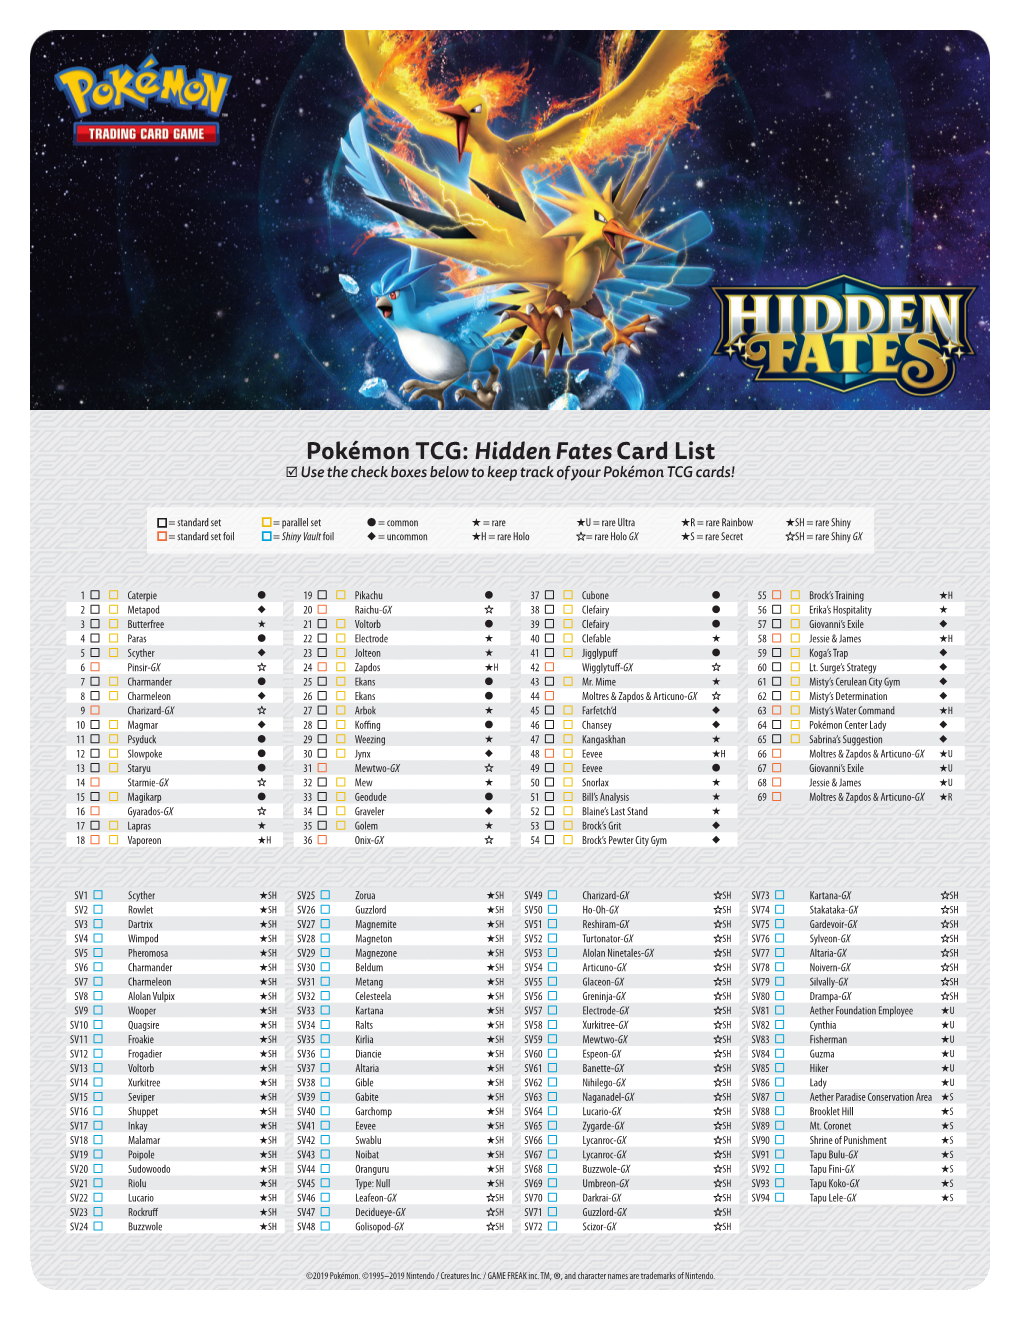 Hidden Fates Card List Use the Check Boxes Below to Keep Track of Your Pokémon TCG Cards!